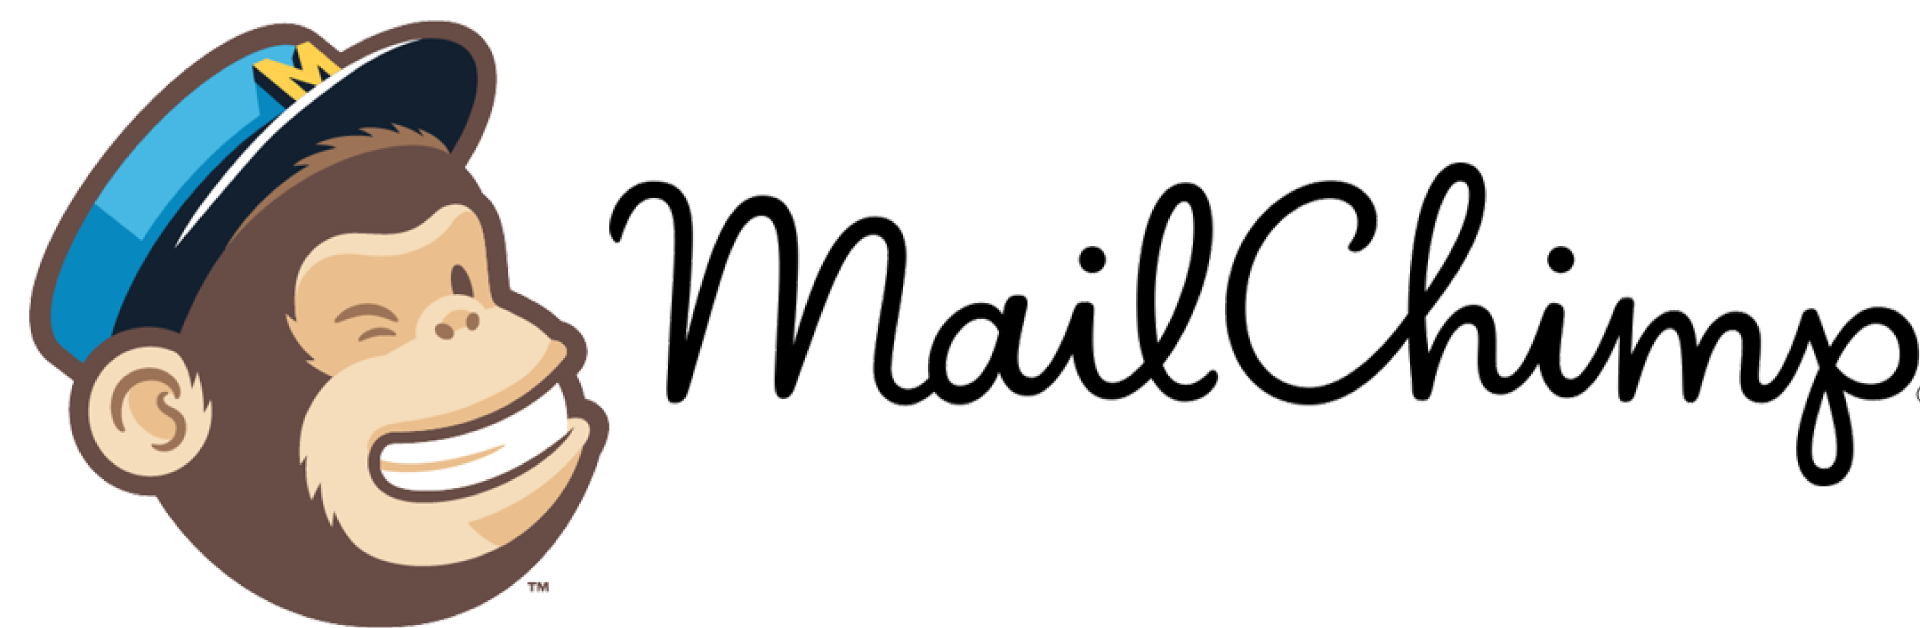 free email marketing software, free email marketing tools, drag and drop editor, free email marketing, email marketing service